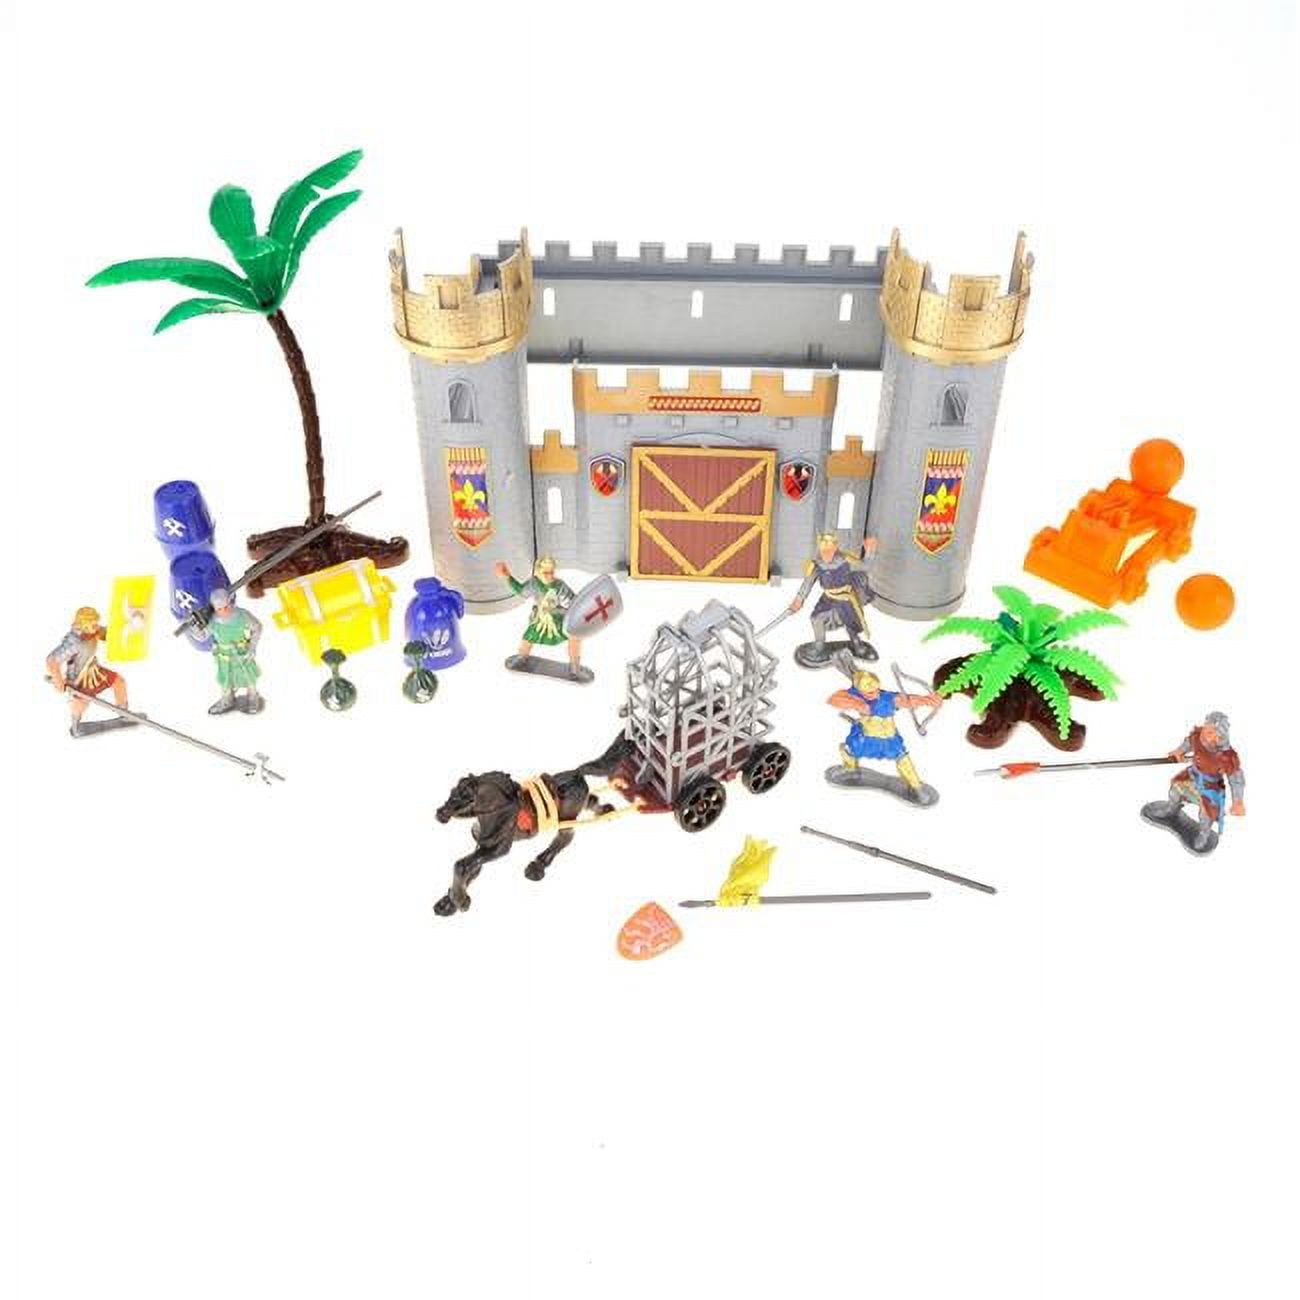 Picture of AZ Trading PSQ0806 Castle Knights Action Figure Toy Army Playset with Assemble Castle for Kids, Multi Color